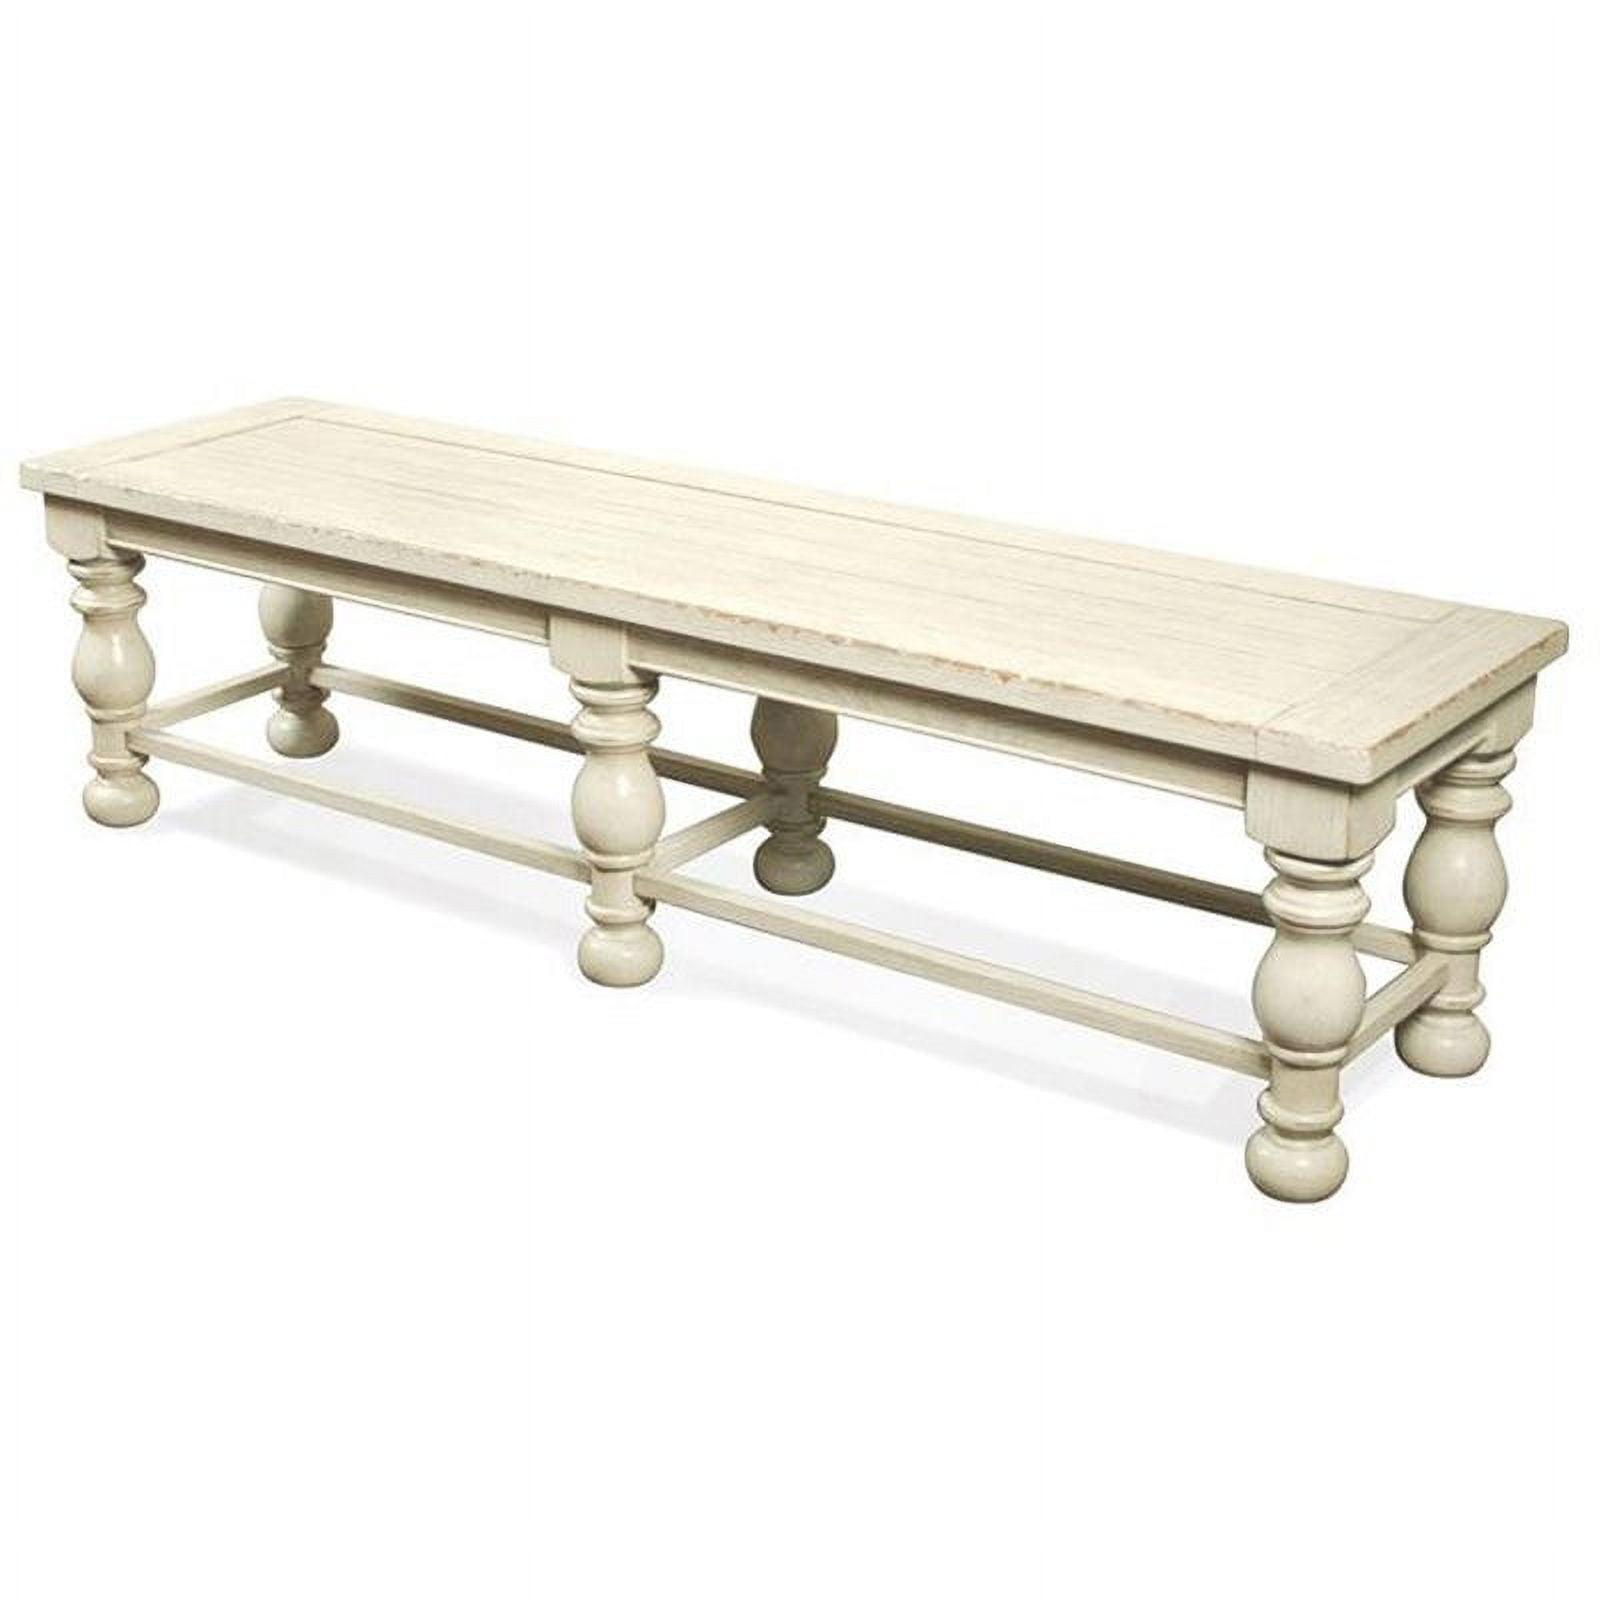 Charmant French Country 68" White Ash Wood Dining Bench